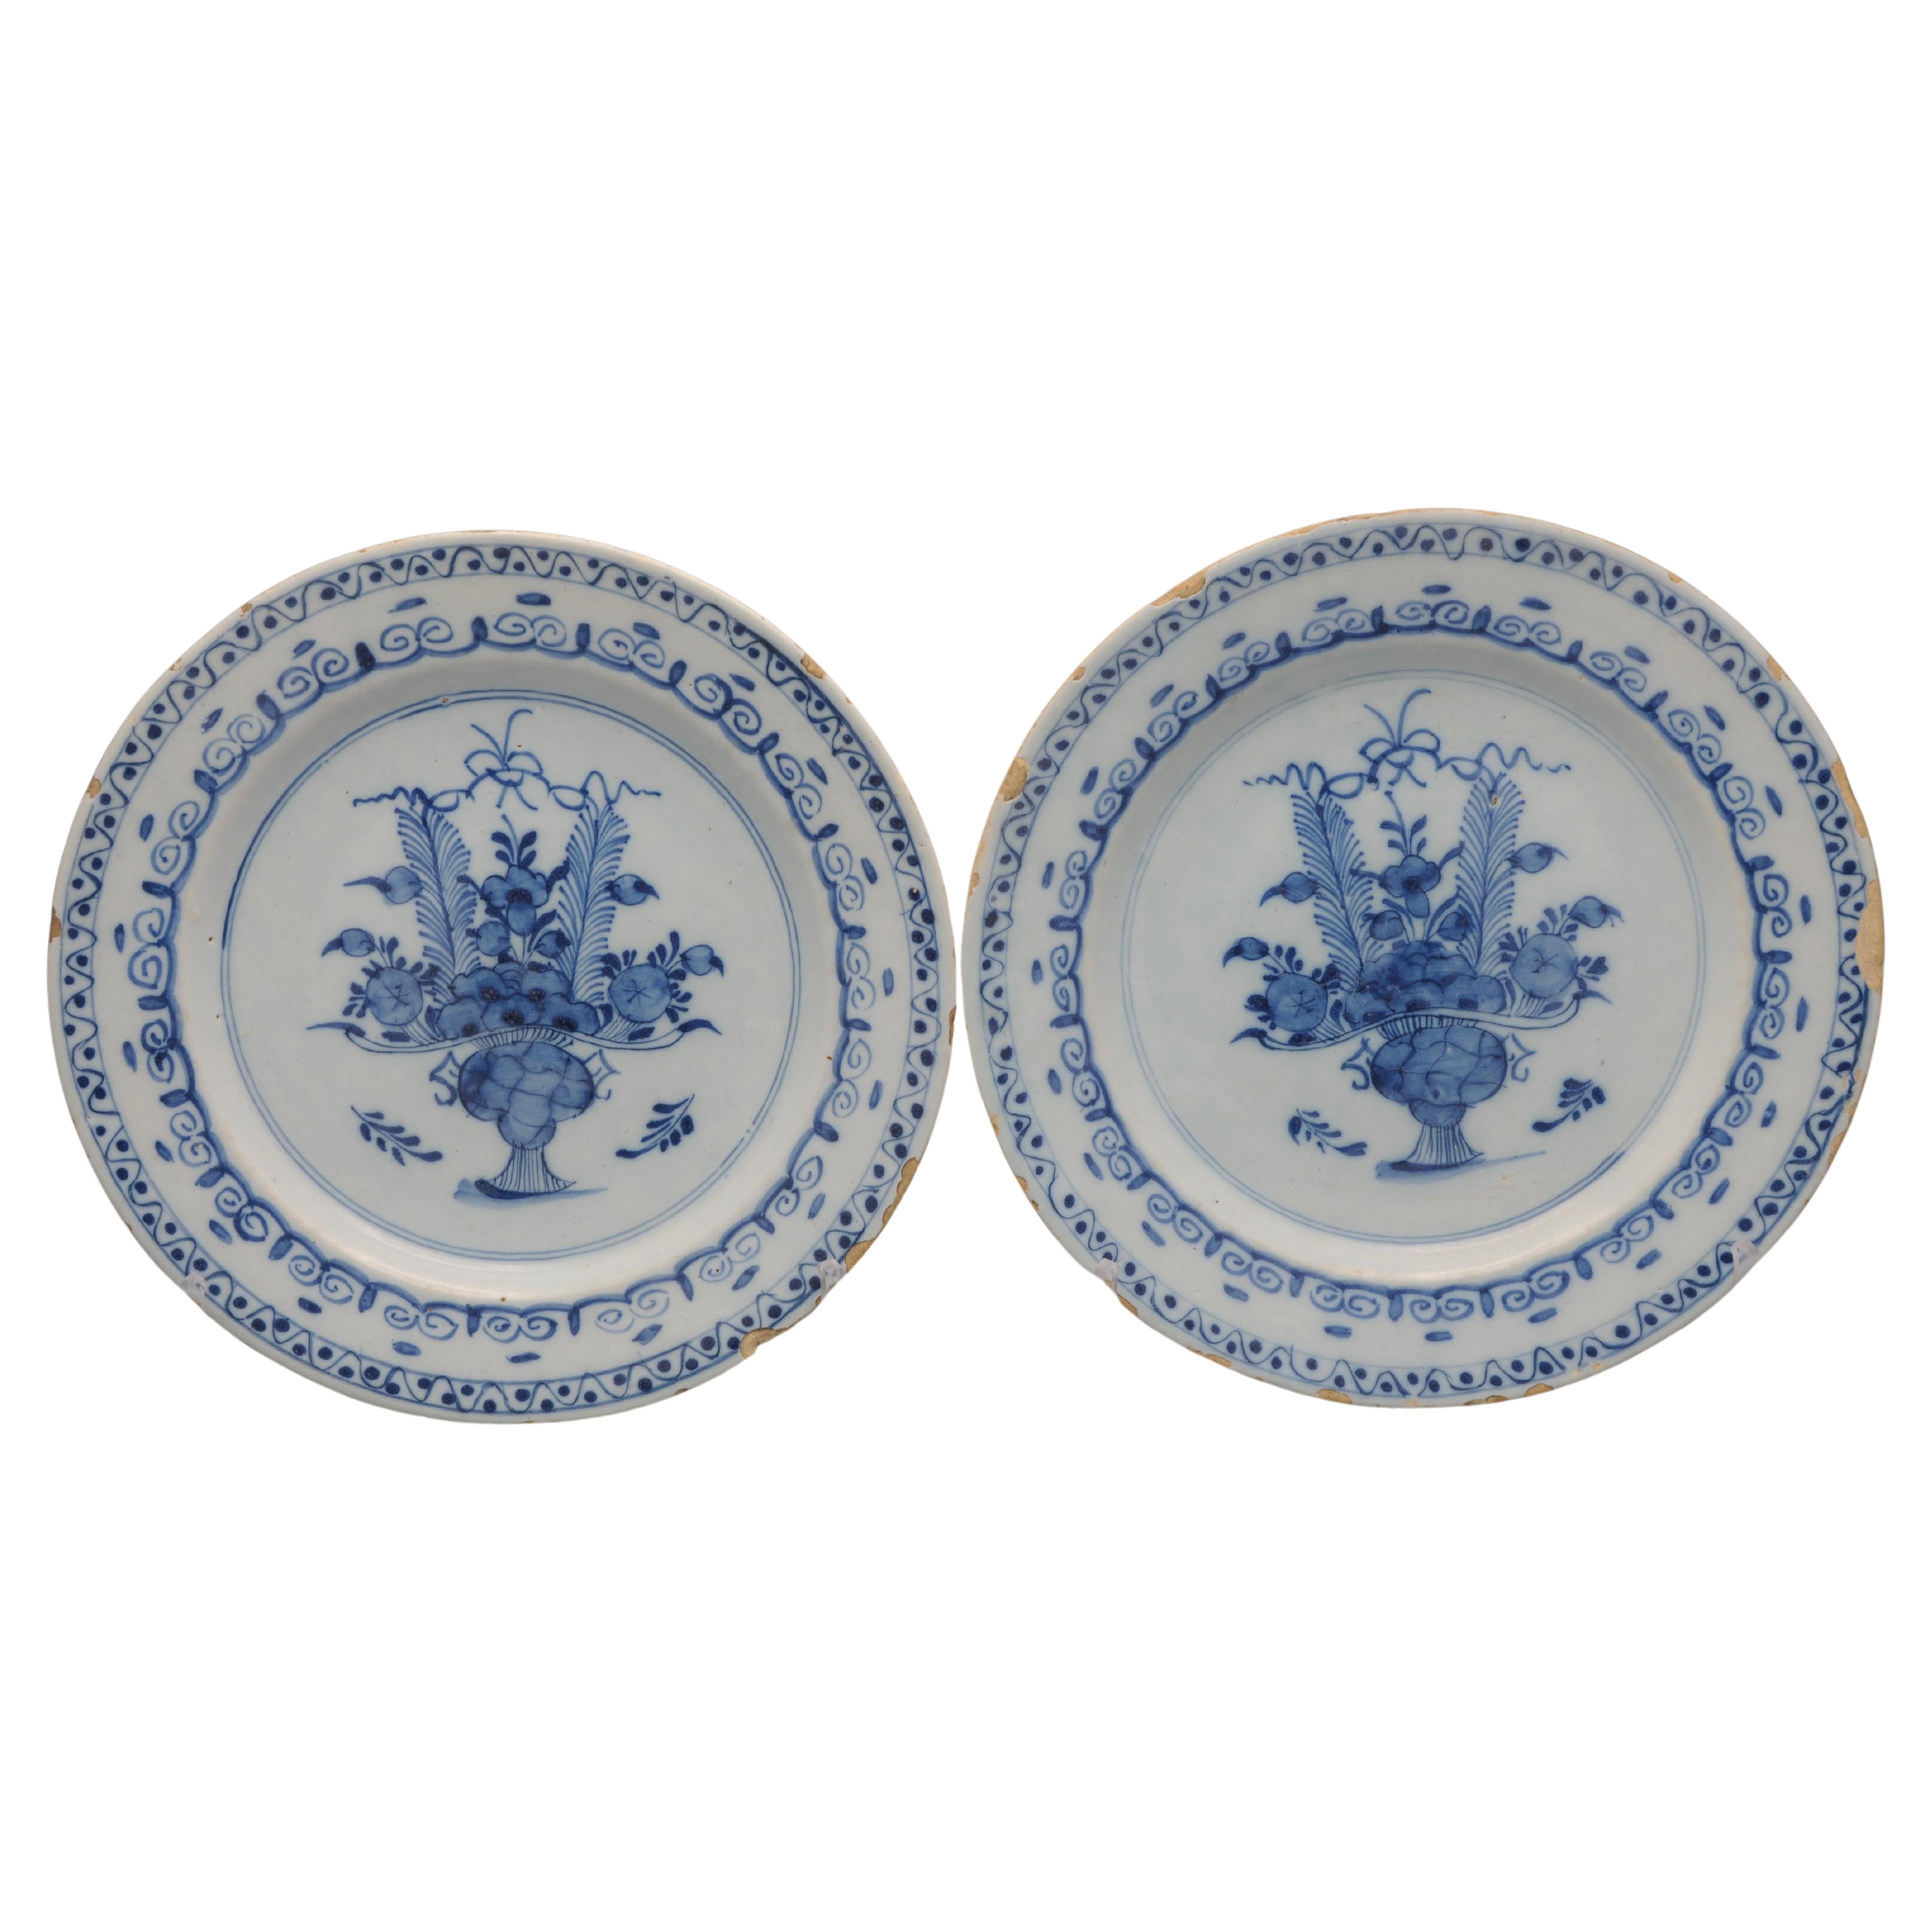 Excellent pair of late 18th century Delftware plates with fine decoration of a flowering basket
Border adorned with foliage scrolls. 

unmarked